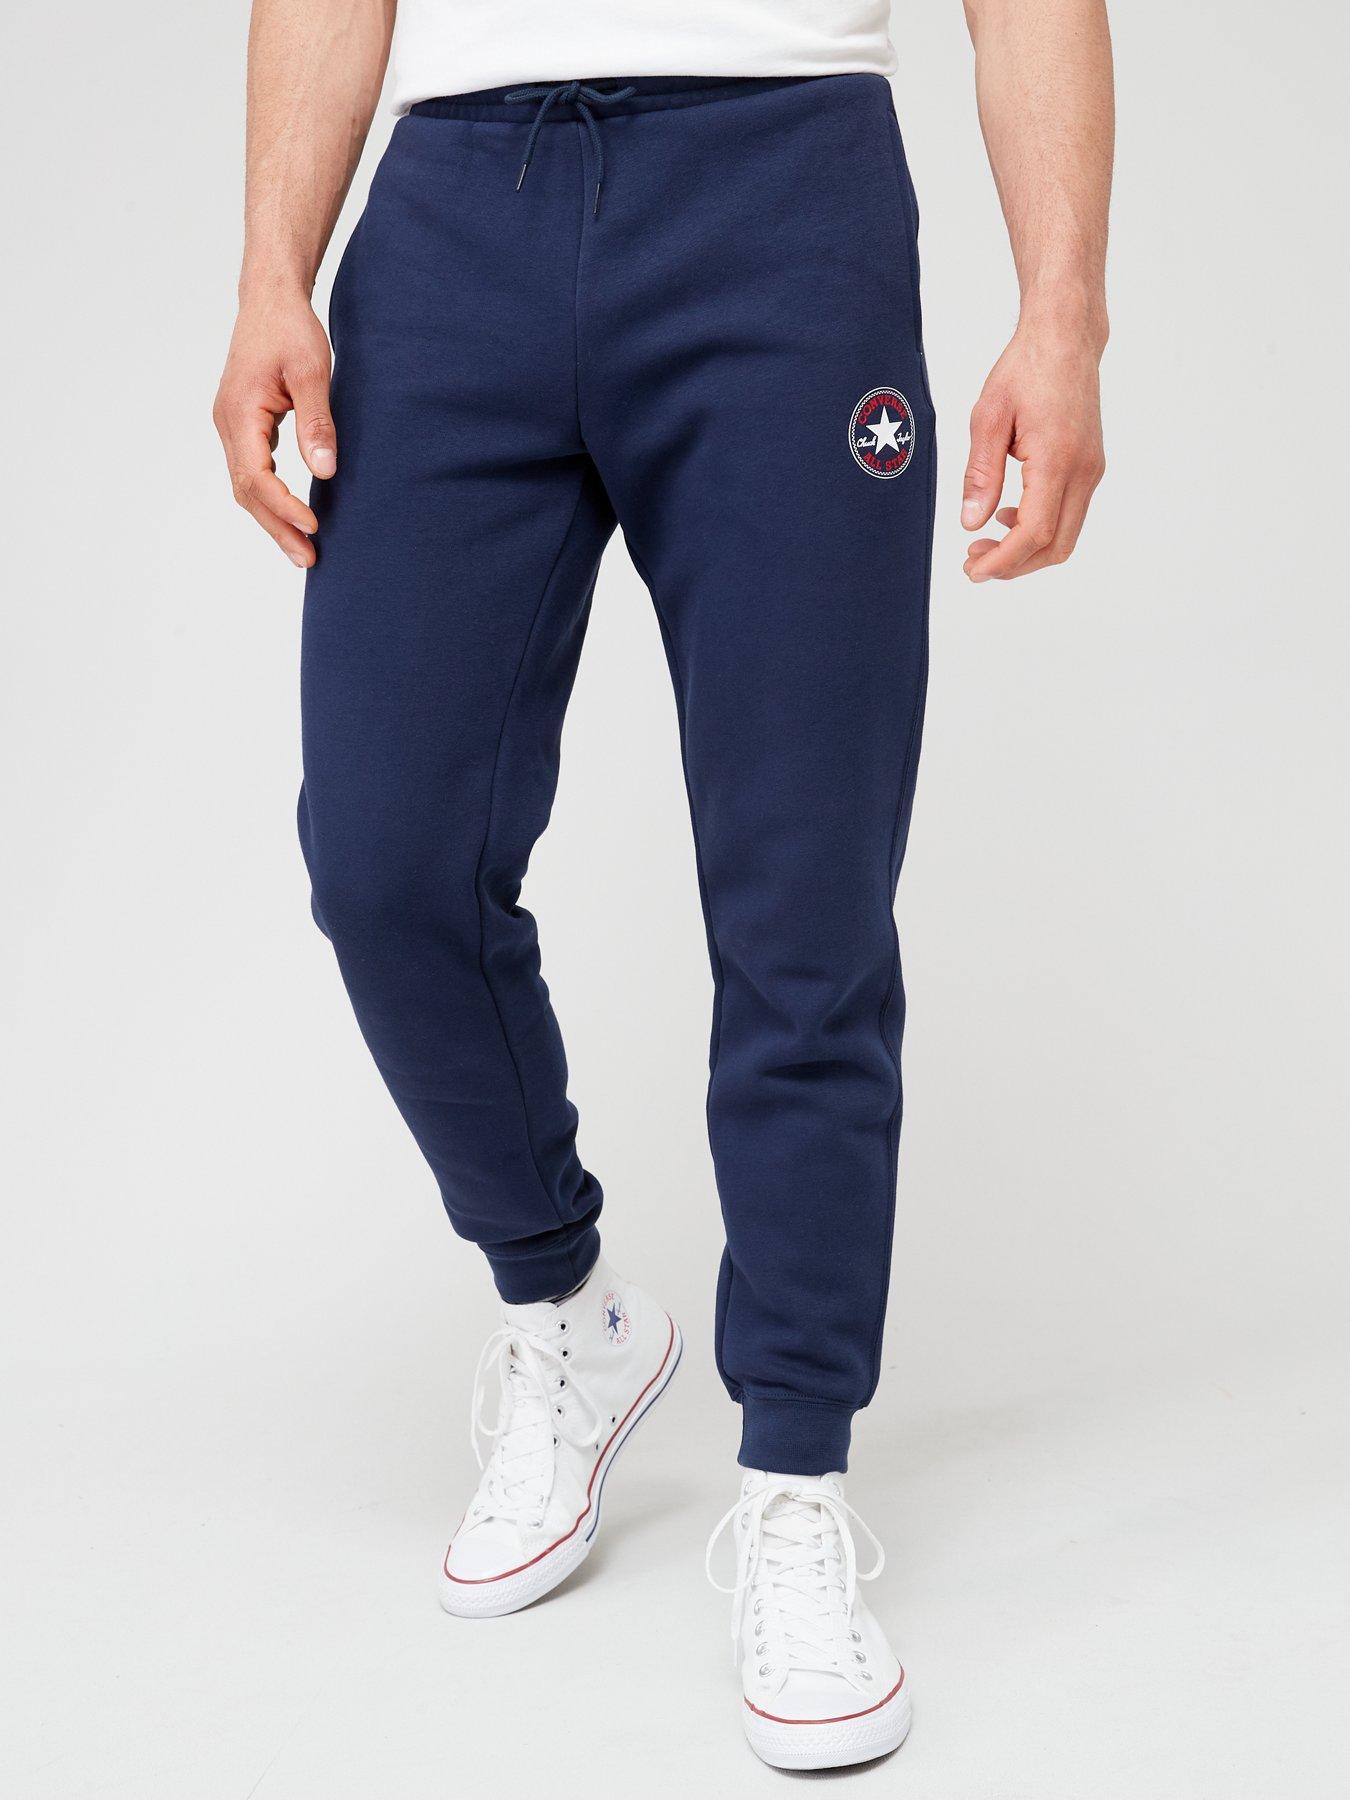 spion Tilskynde plan Converse | Jogging bottoms | Mens sports clothing | Sports & leisure |  www.very.co.uk